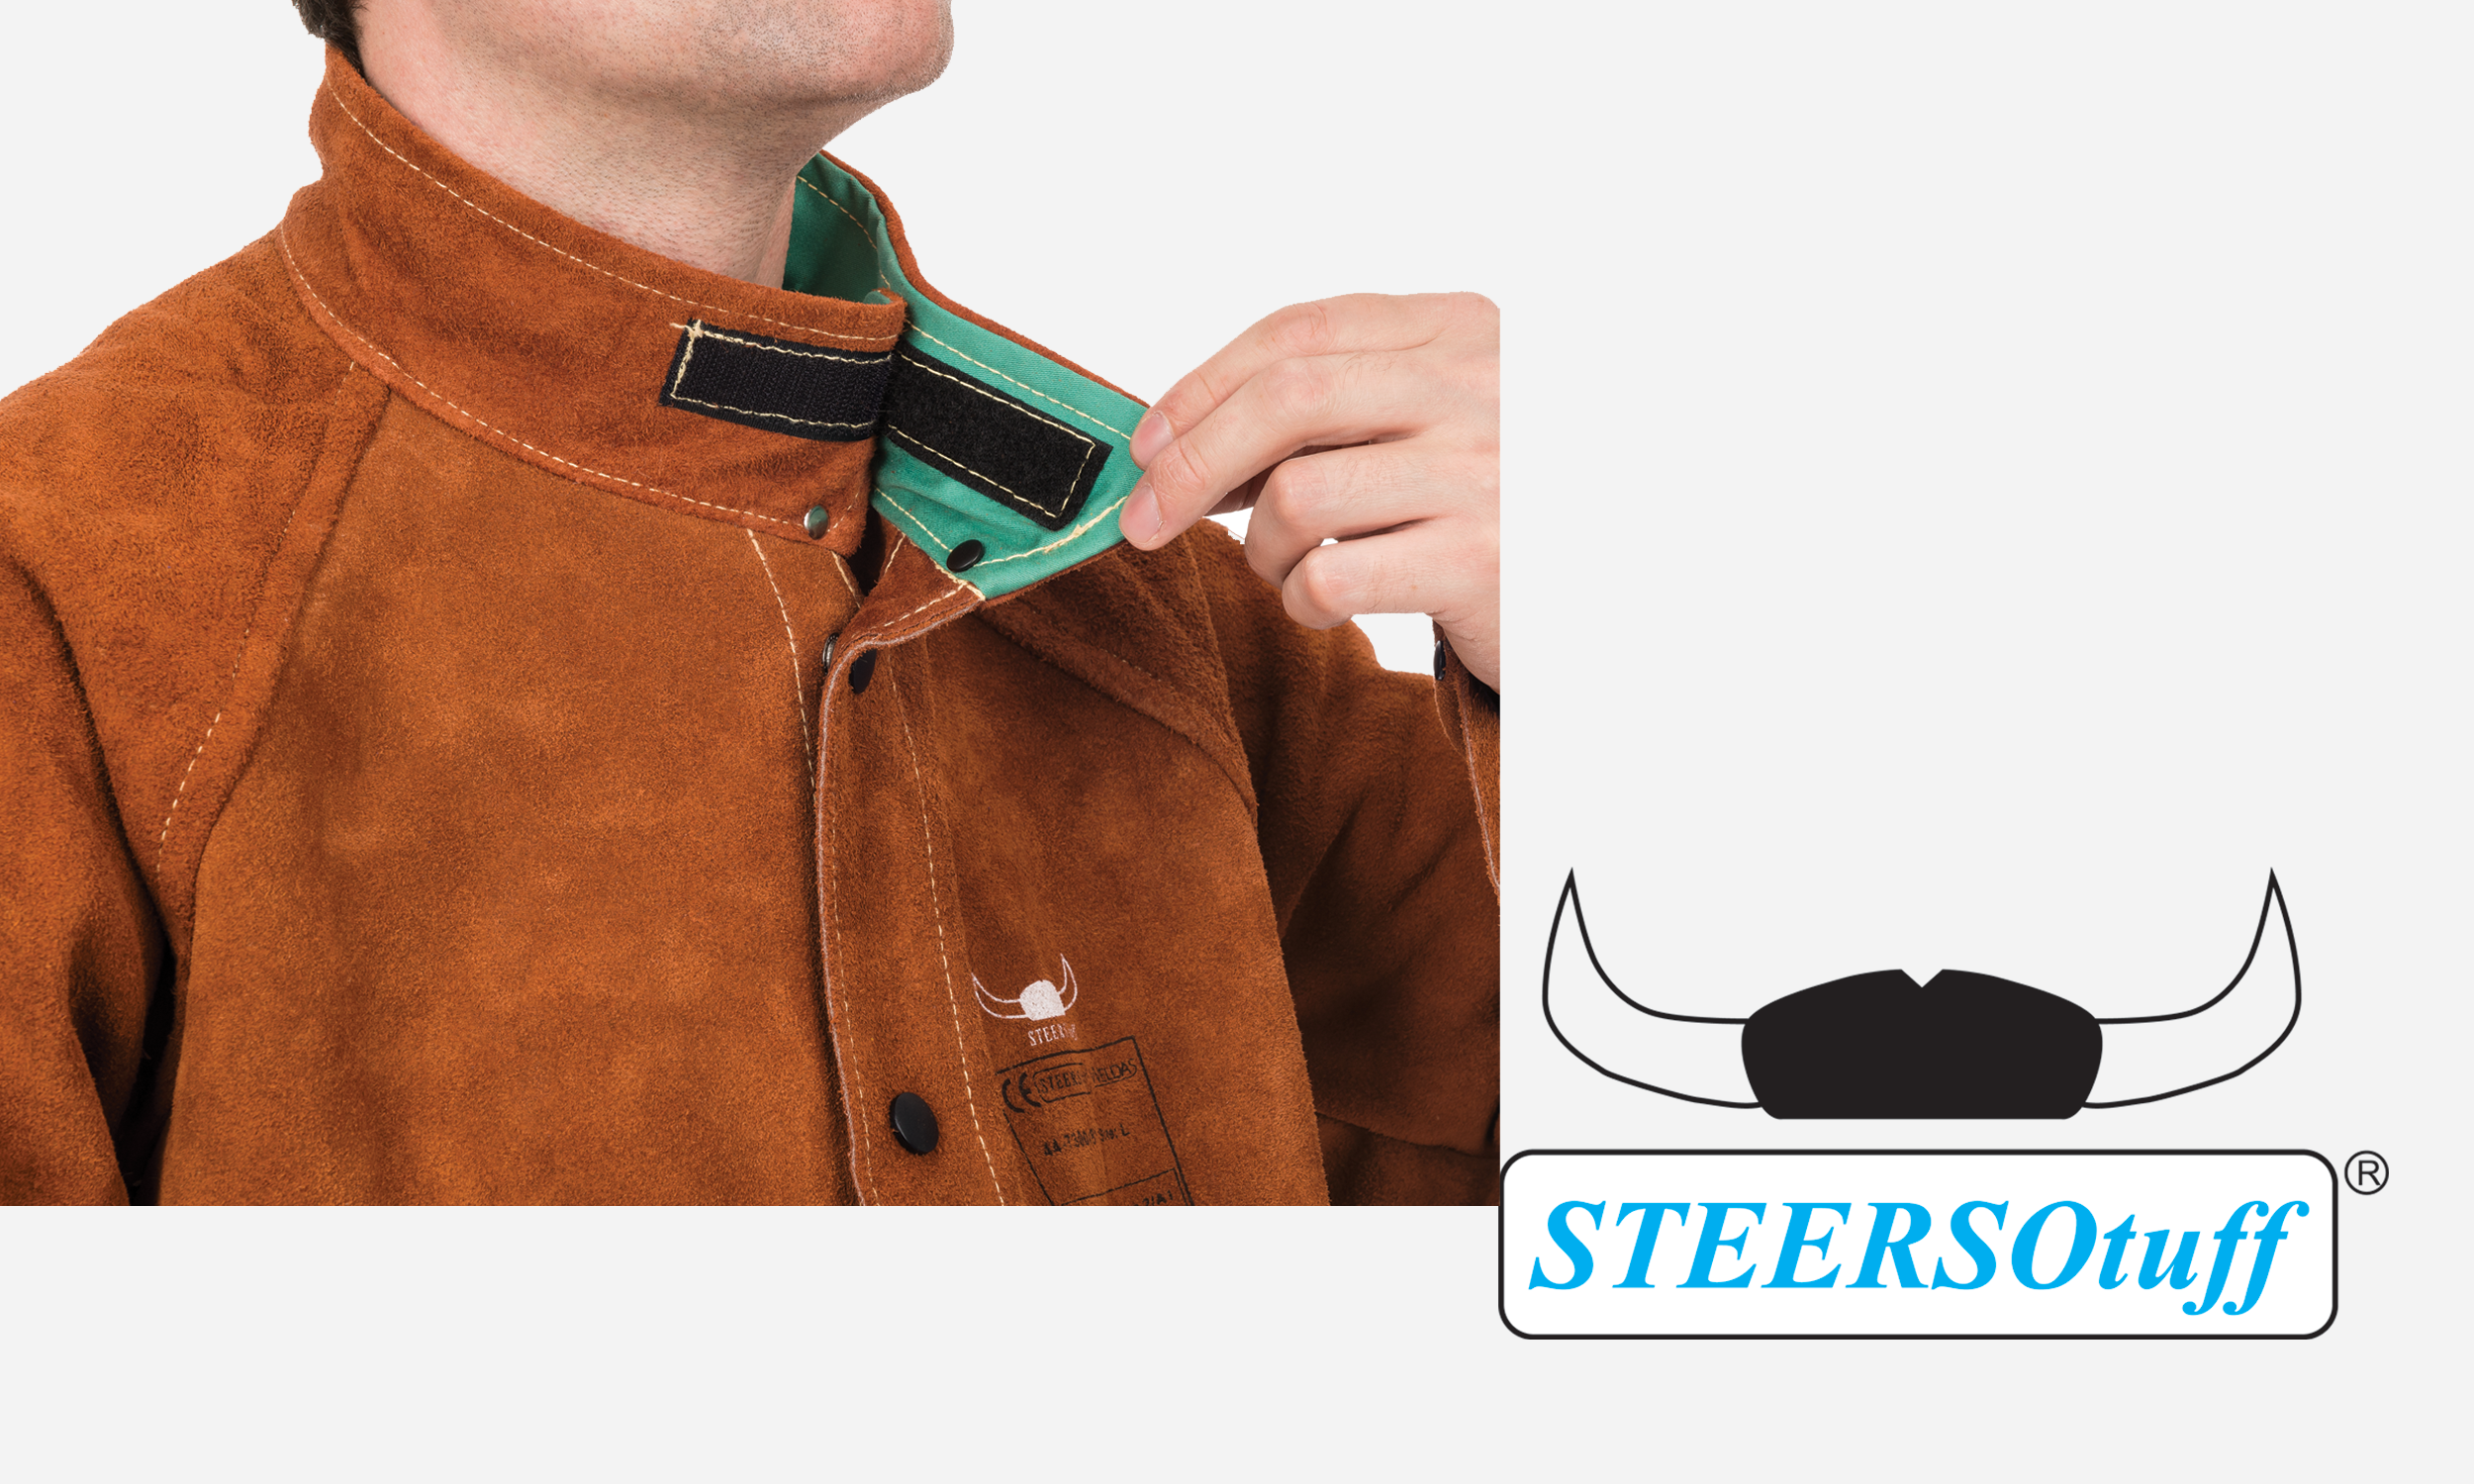 44-7300 STEERSOtuff Leather Jacket Roll-up Collar.png